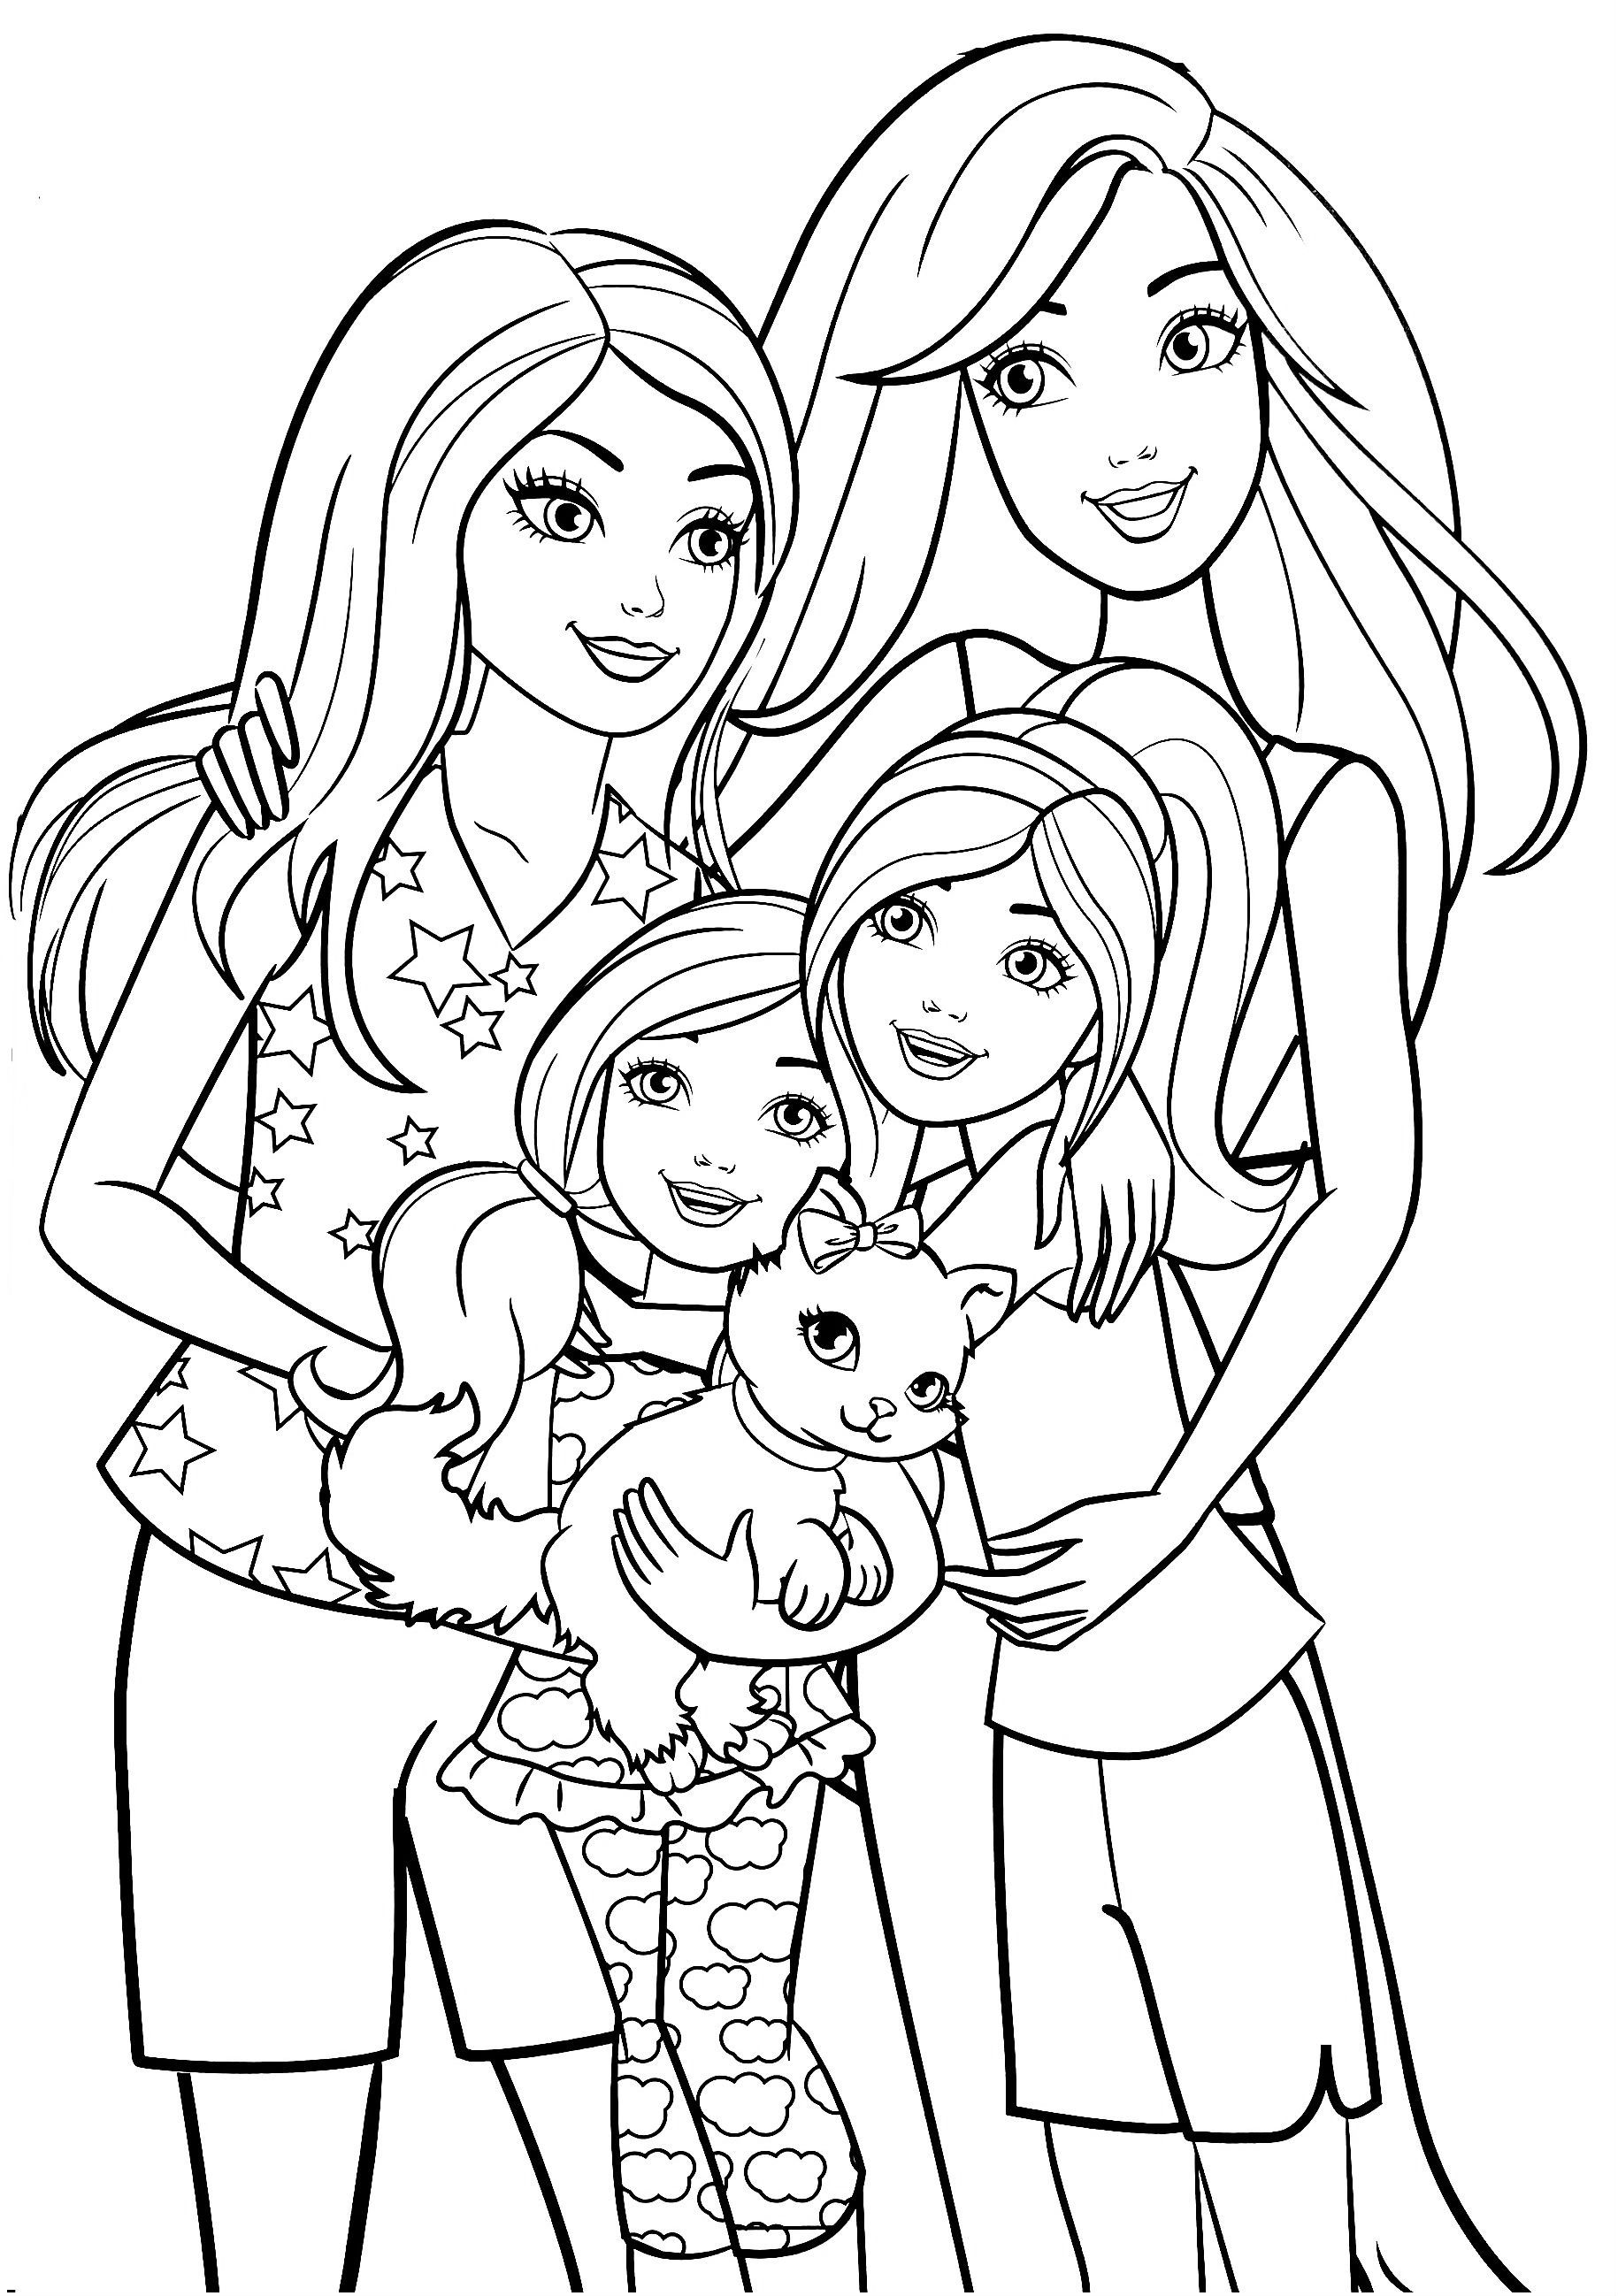 Printable Barbie And Friends Coloring Pages Pdf - Free Printable Barbie And Friends Coloring Pages